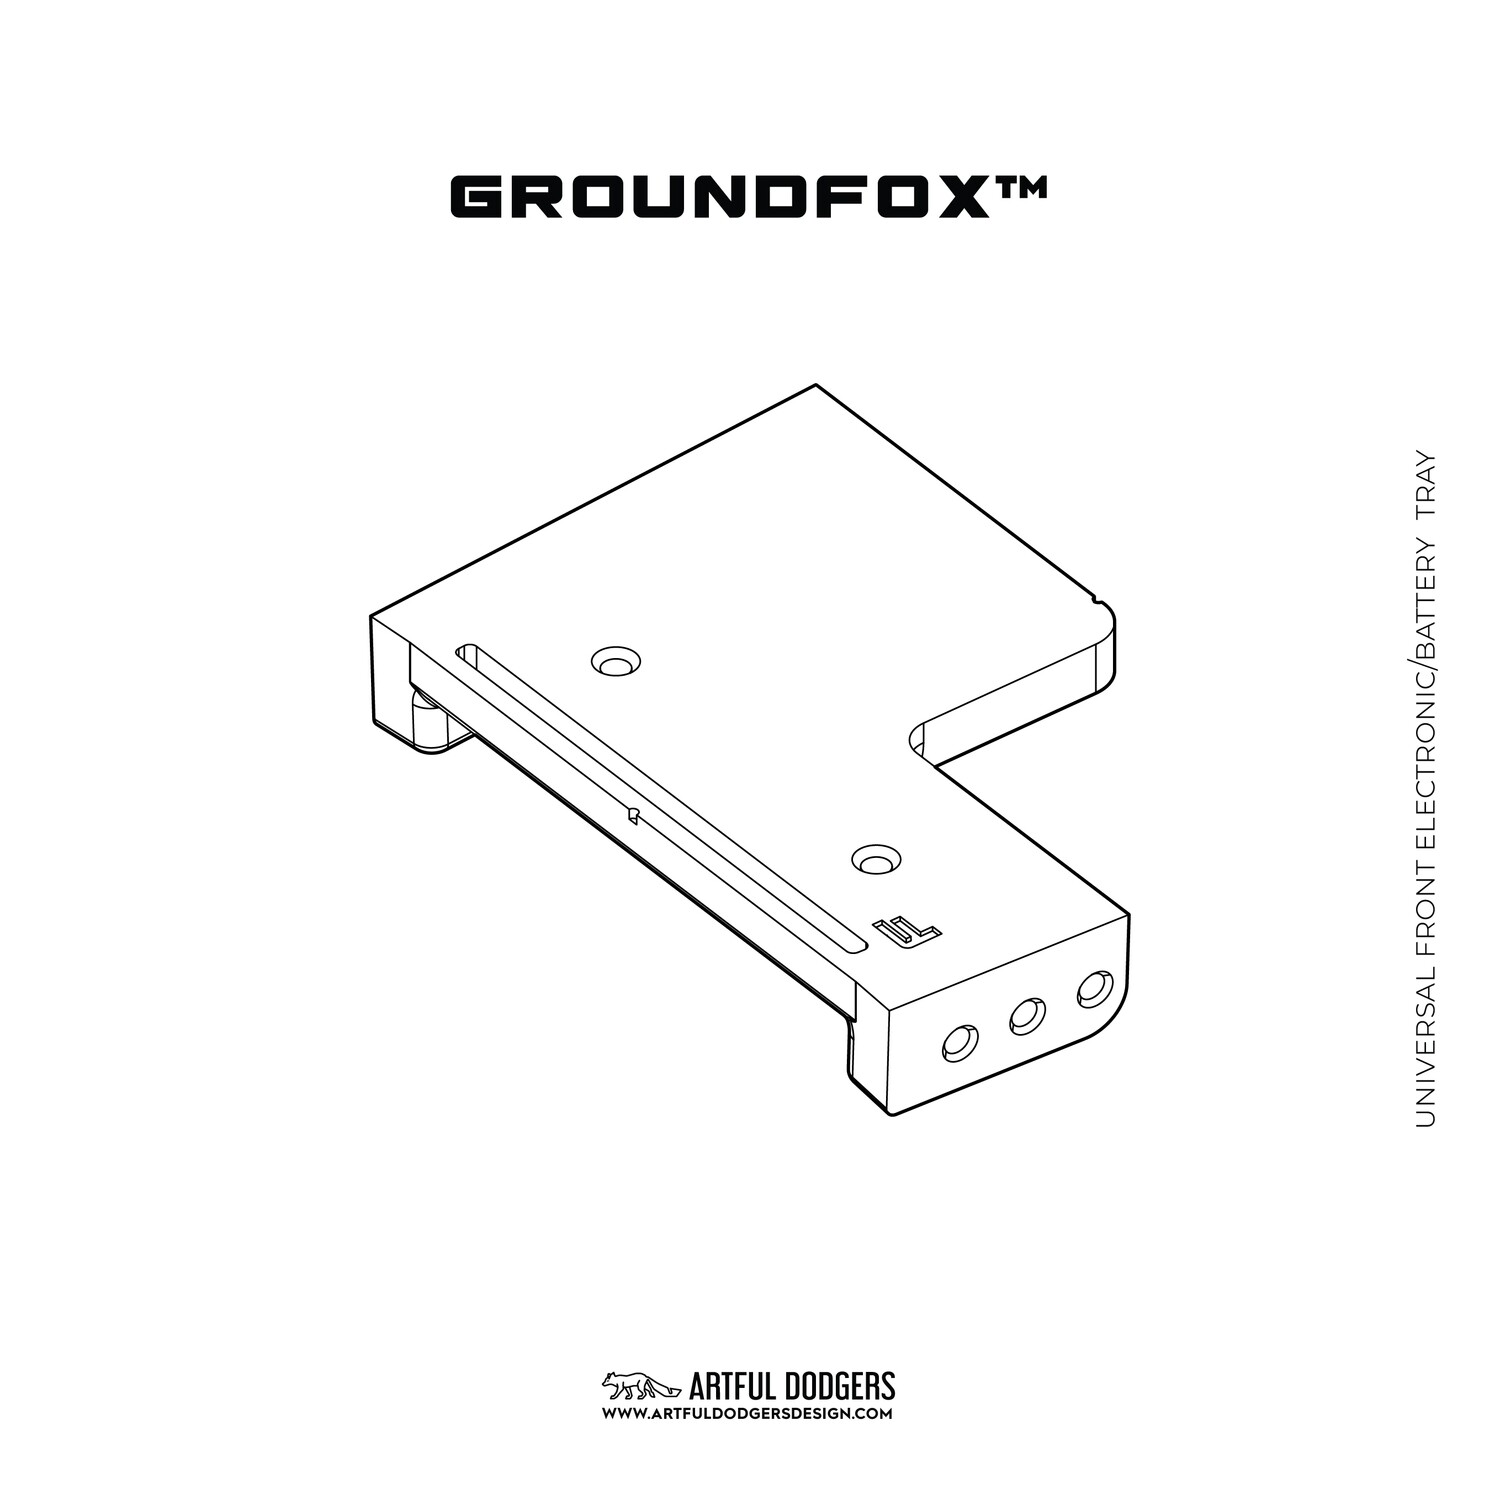 GroundFox v1.2 Front battery/electronic tray